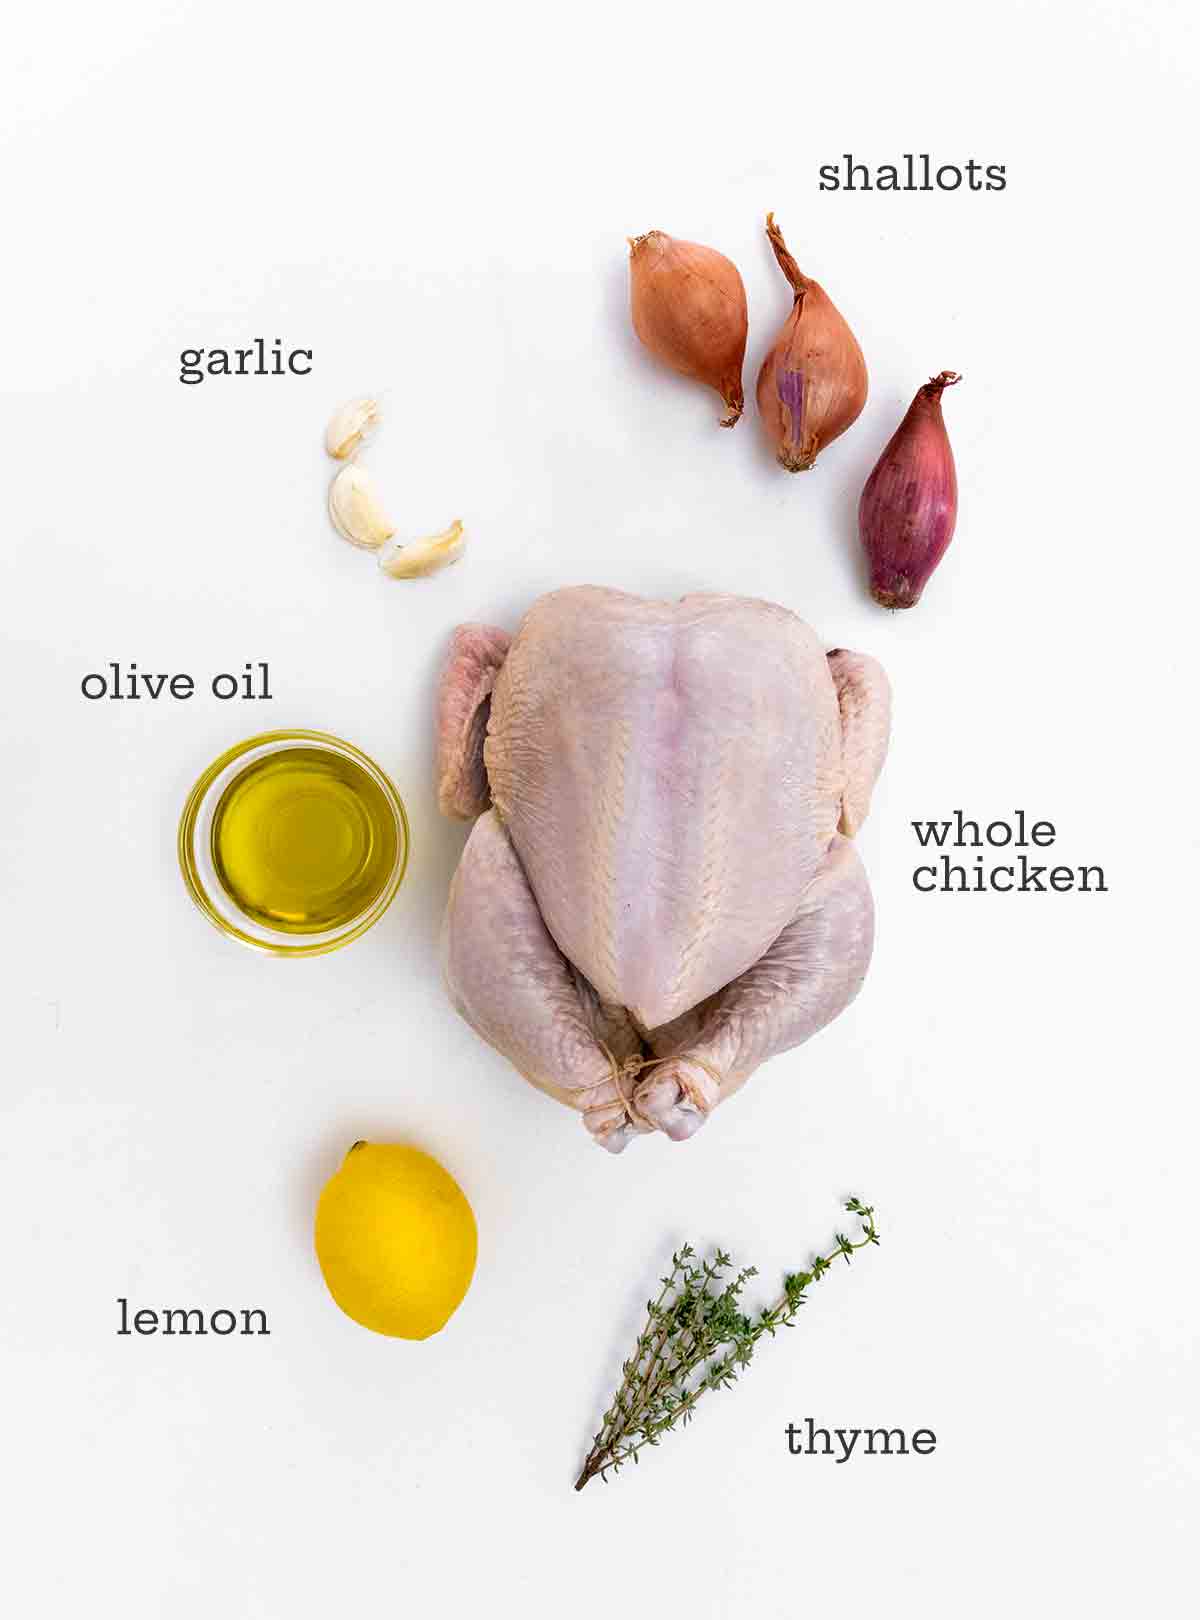 A whole chicken, shallots, garlic cloves, olive oil, a lemon, and some thyme on a white background.